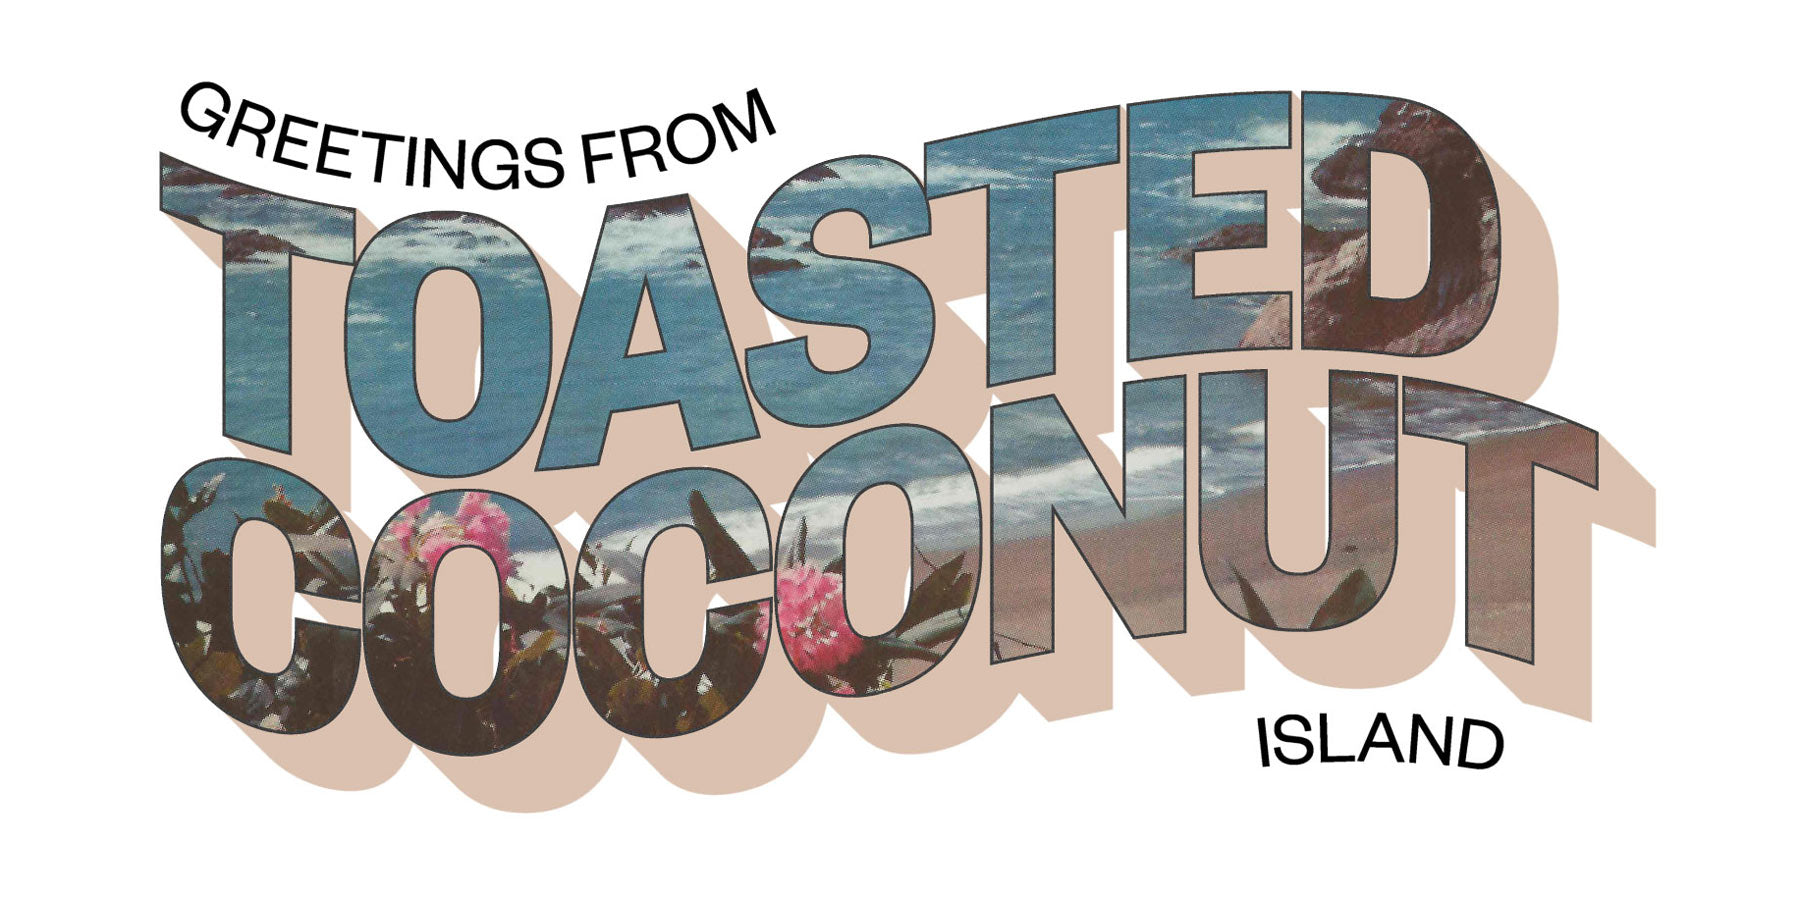 Greetings from Toasted Coconut Island